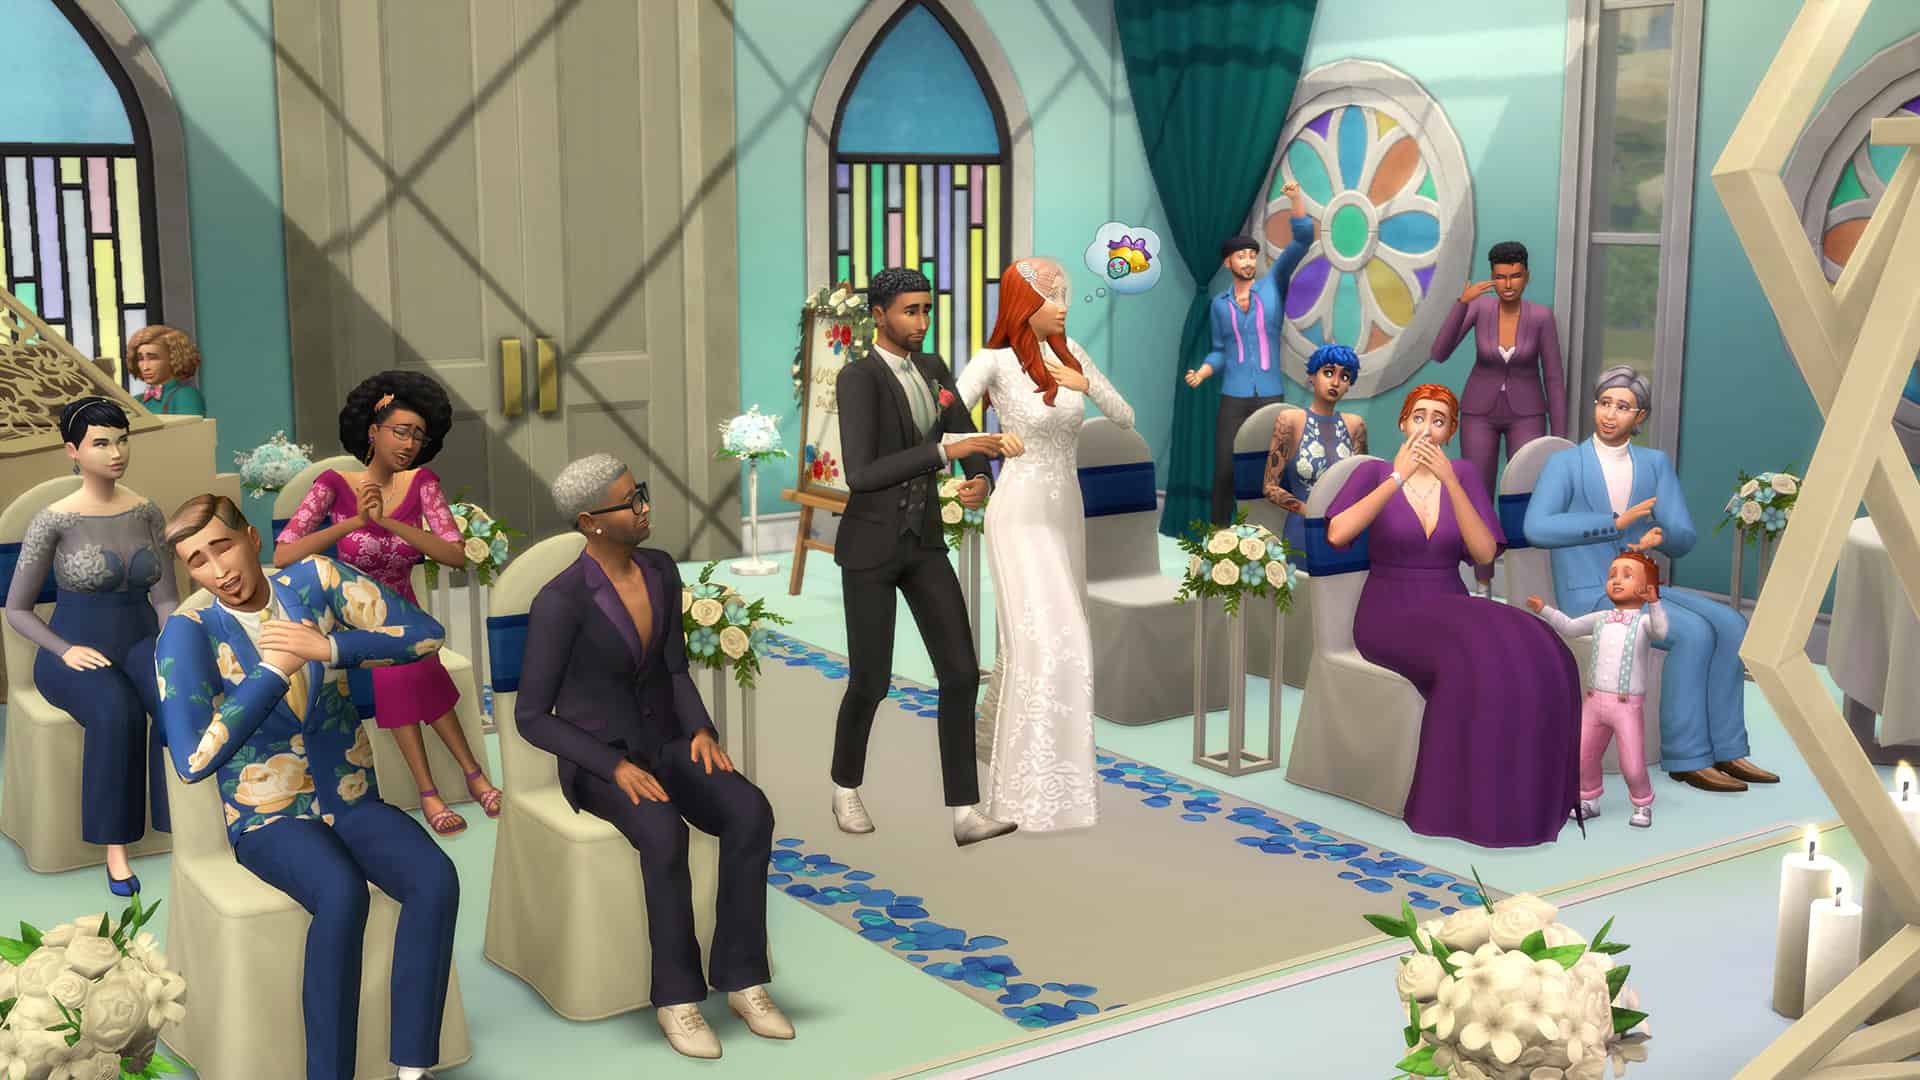 The Sims 4 delays release of My Wedding Stories pack by one week